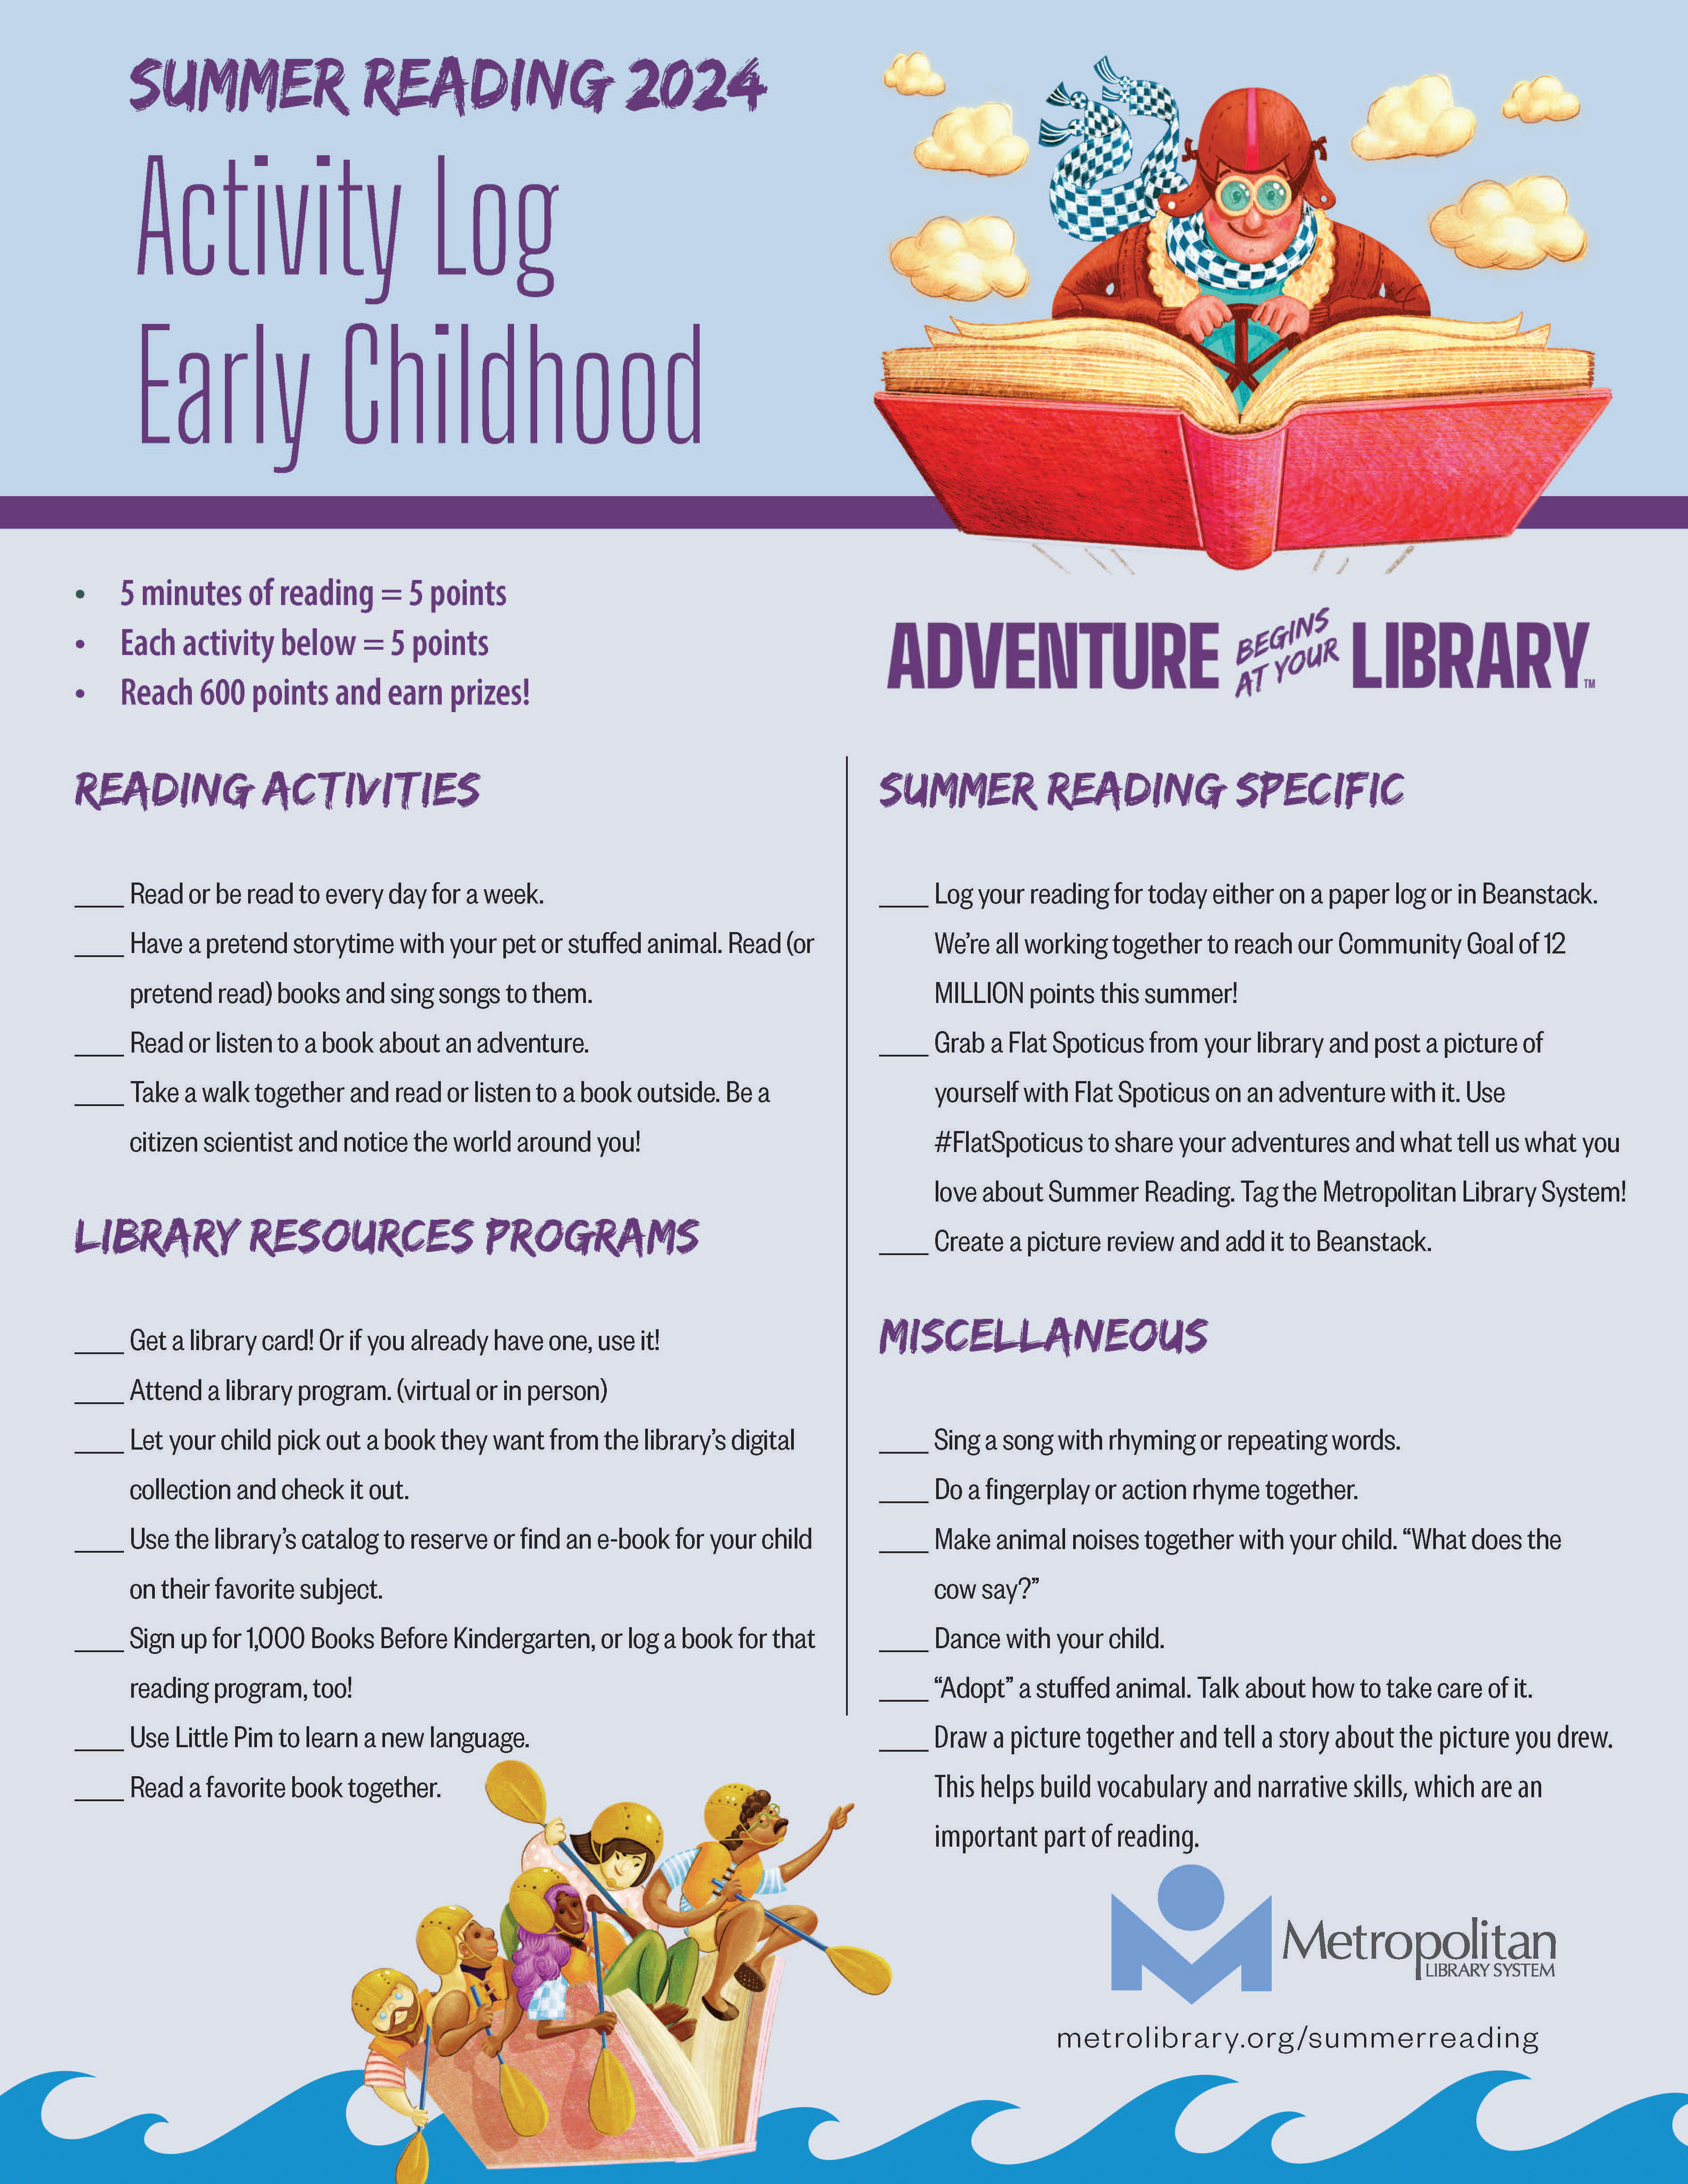 Activity Log - Early Childhood